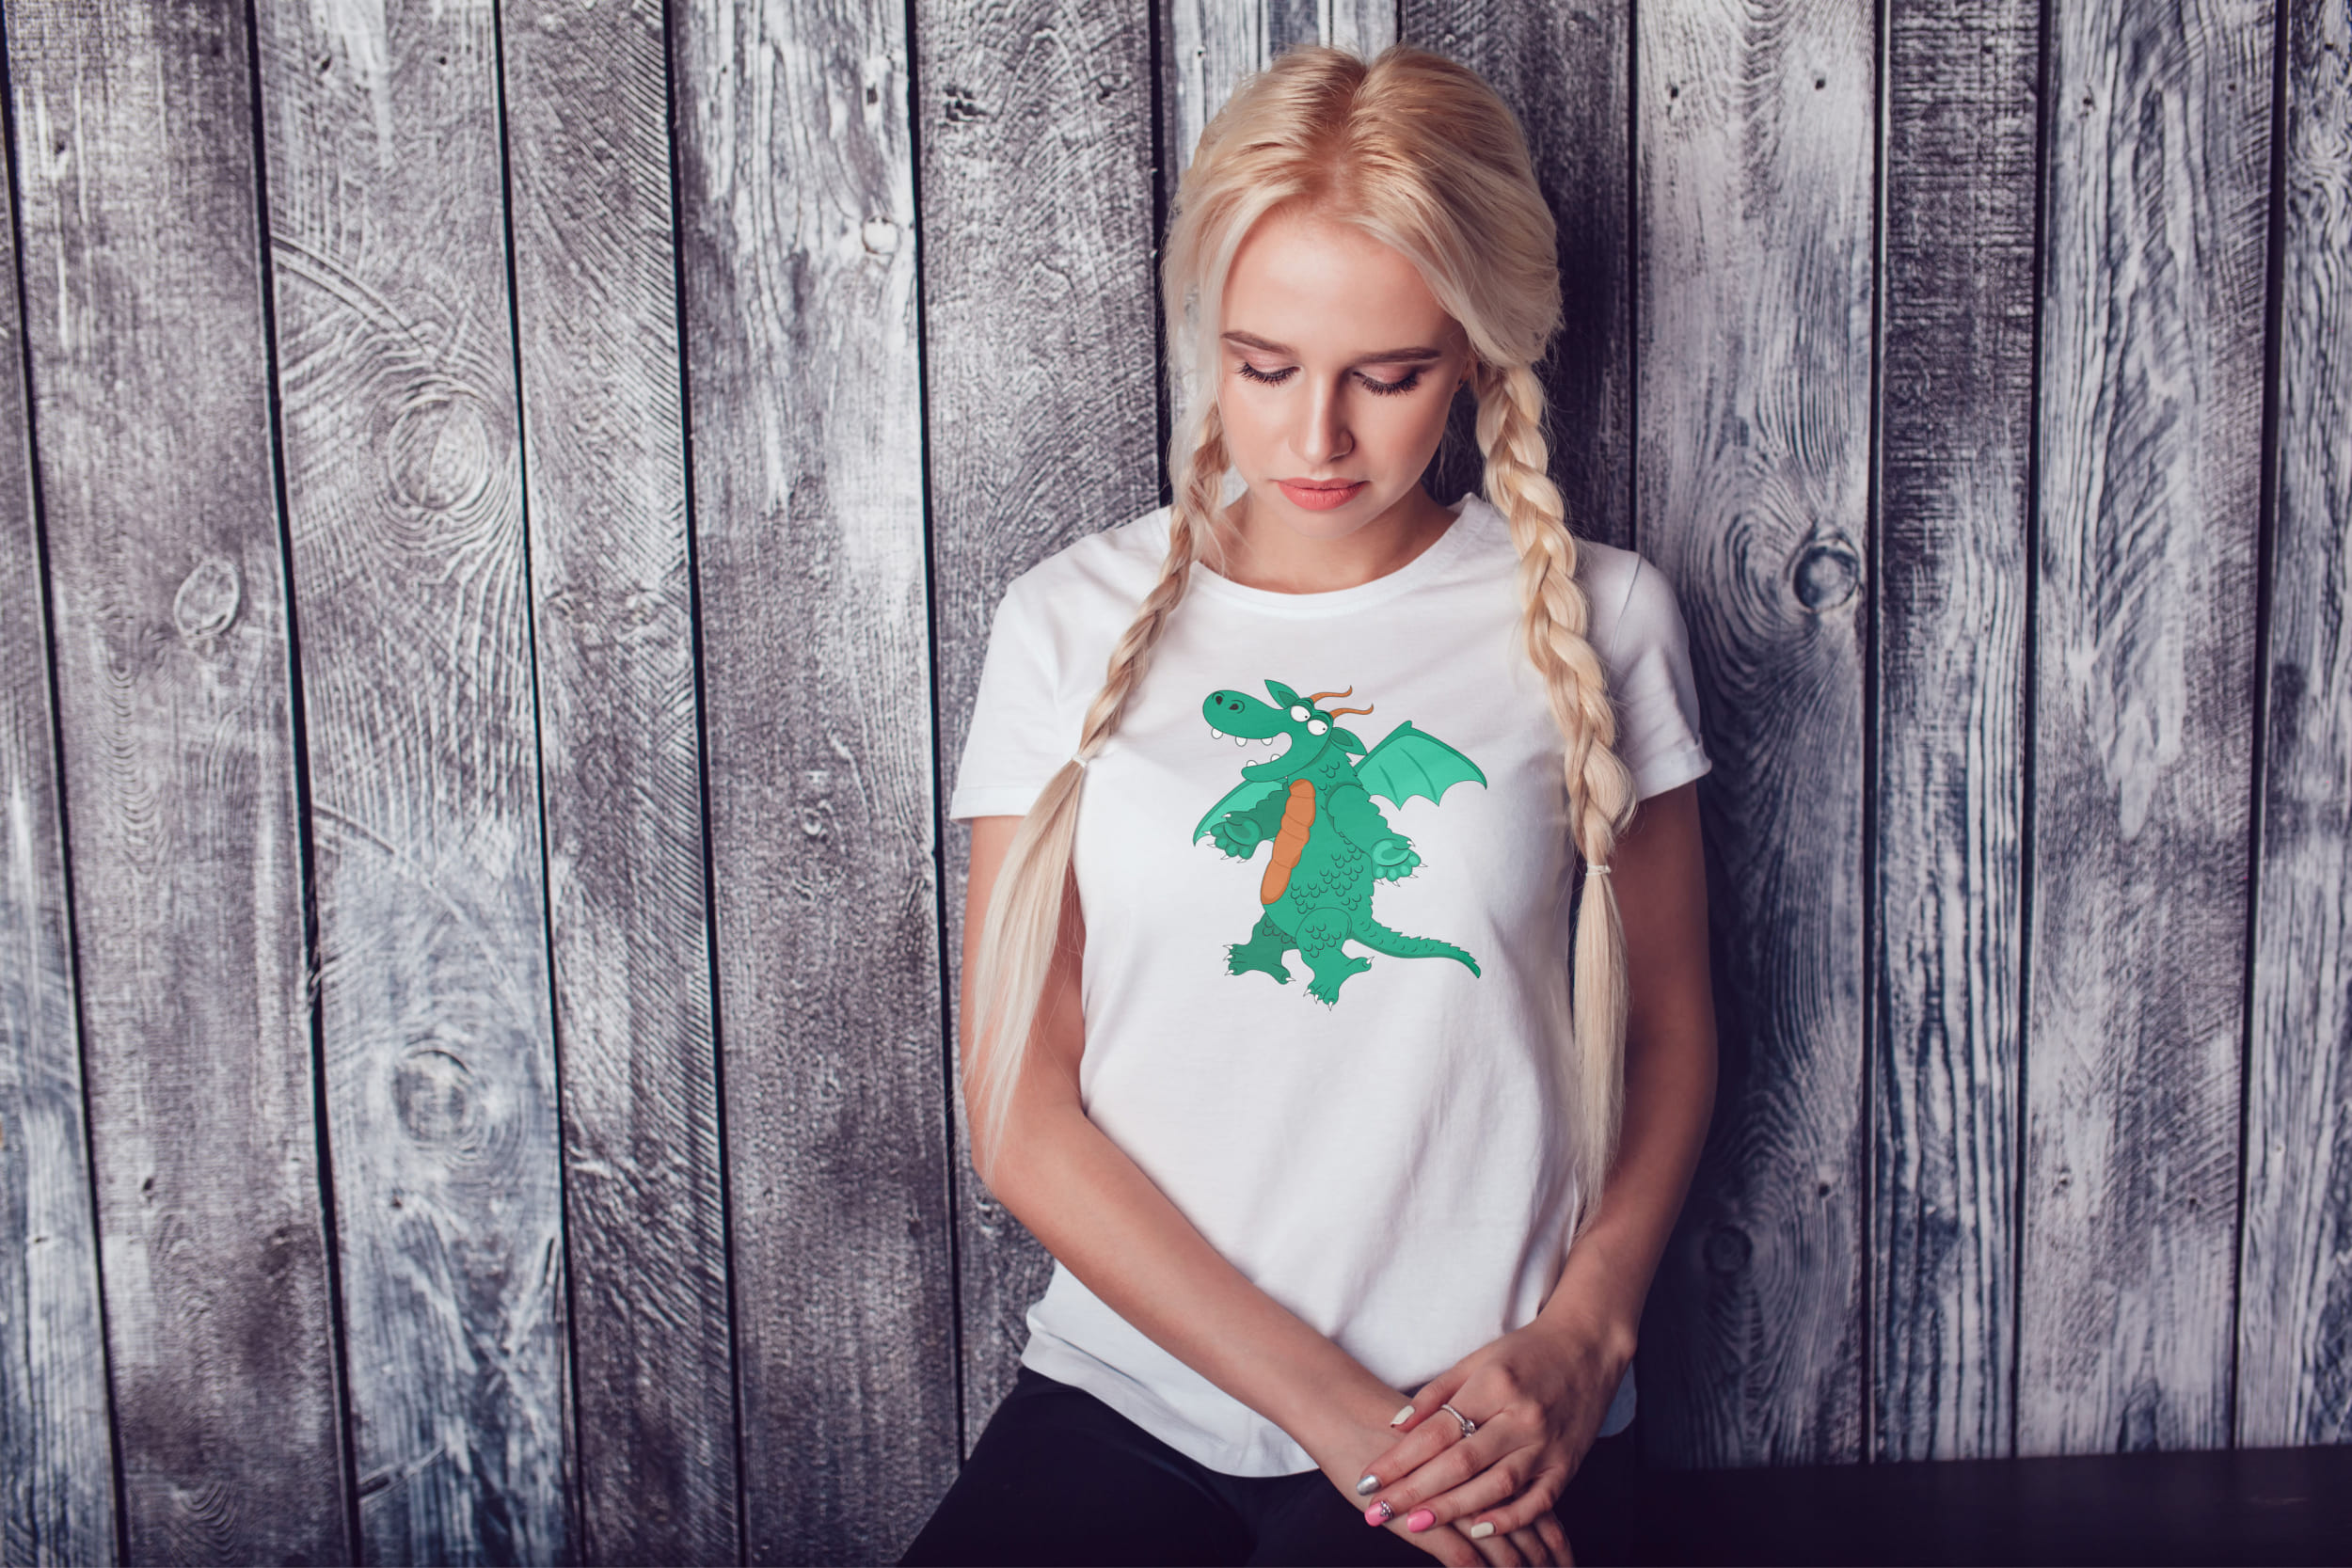 A girl with blond hair and a white T-shirt with a green and orange dragon.